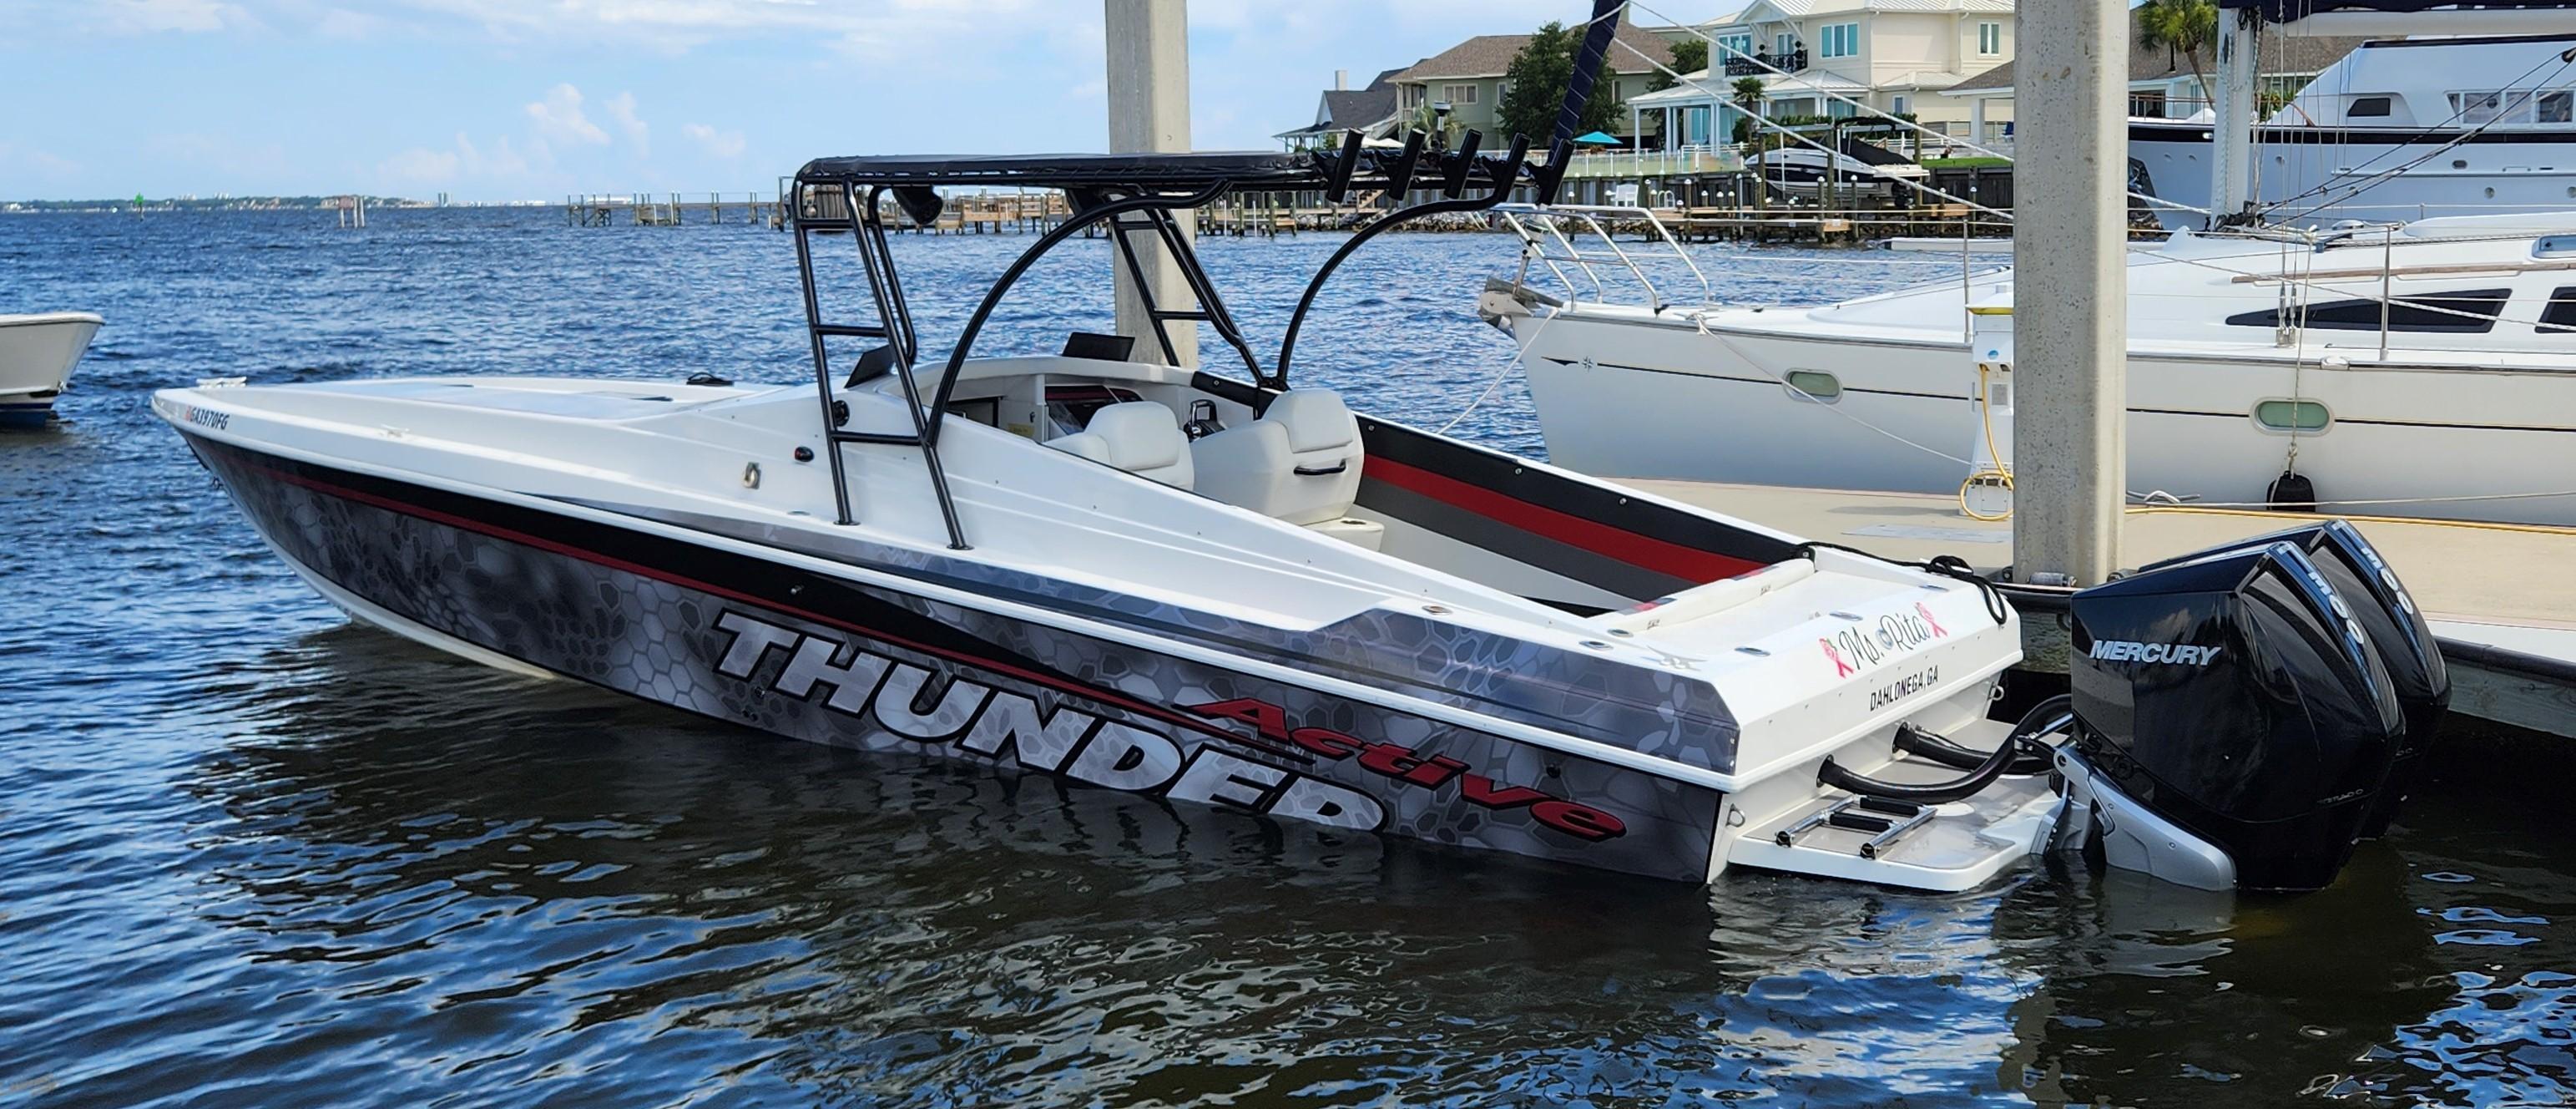 Blackwater boats for sale - Boat Trader